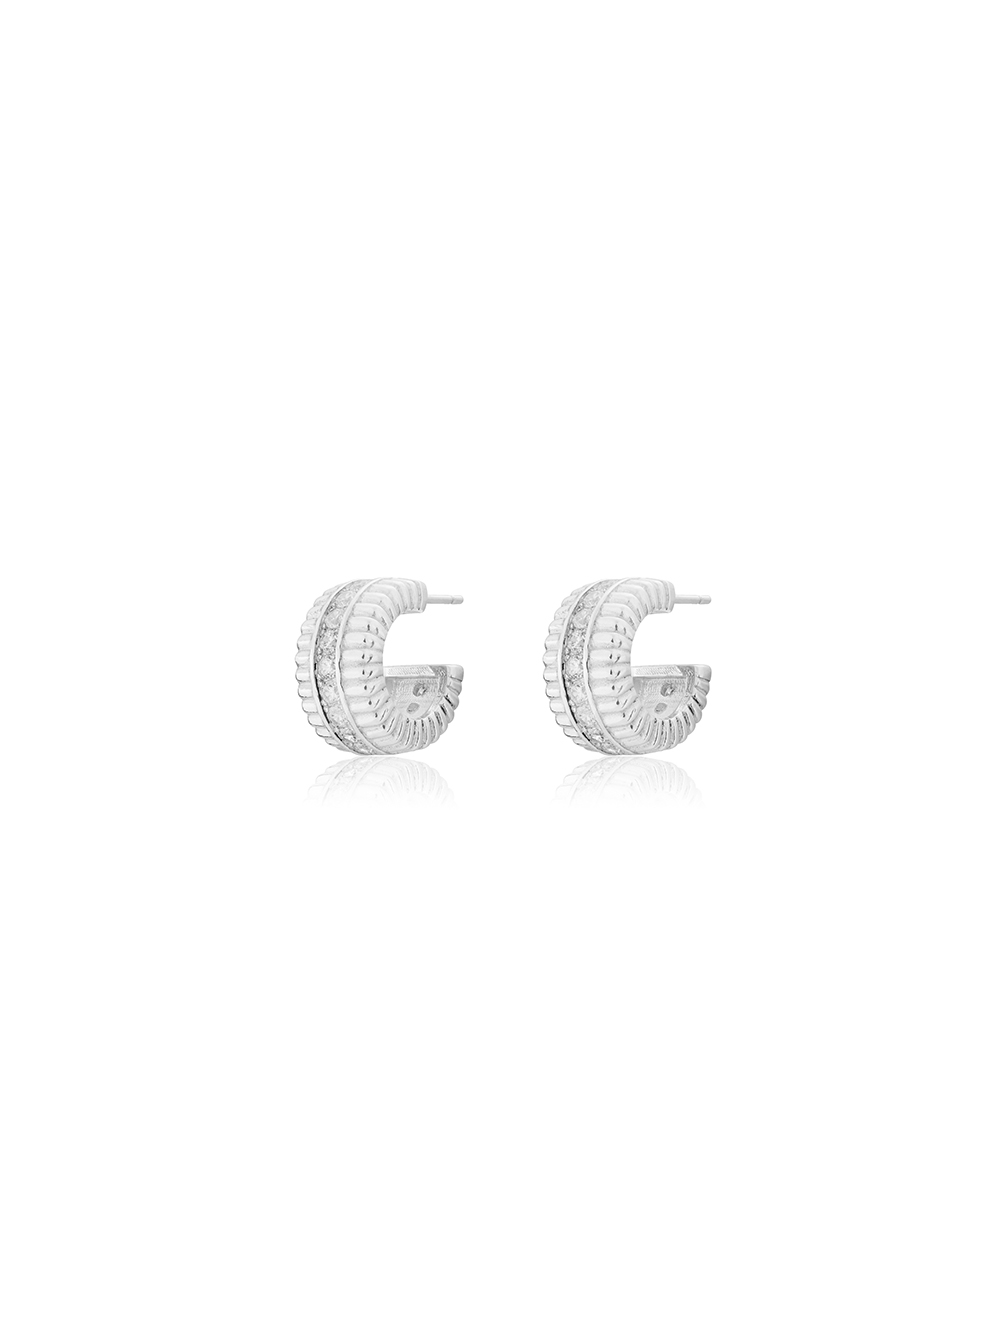 NACHT EARRING #01 (silver925/0.01ct)